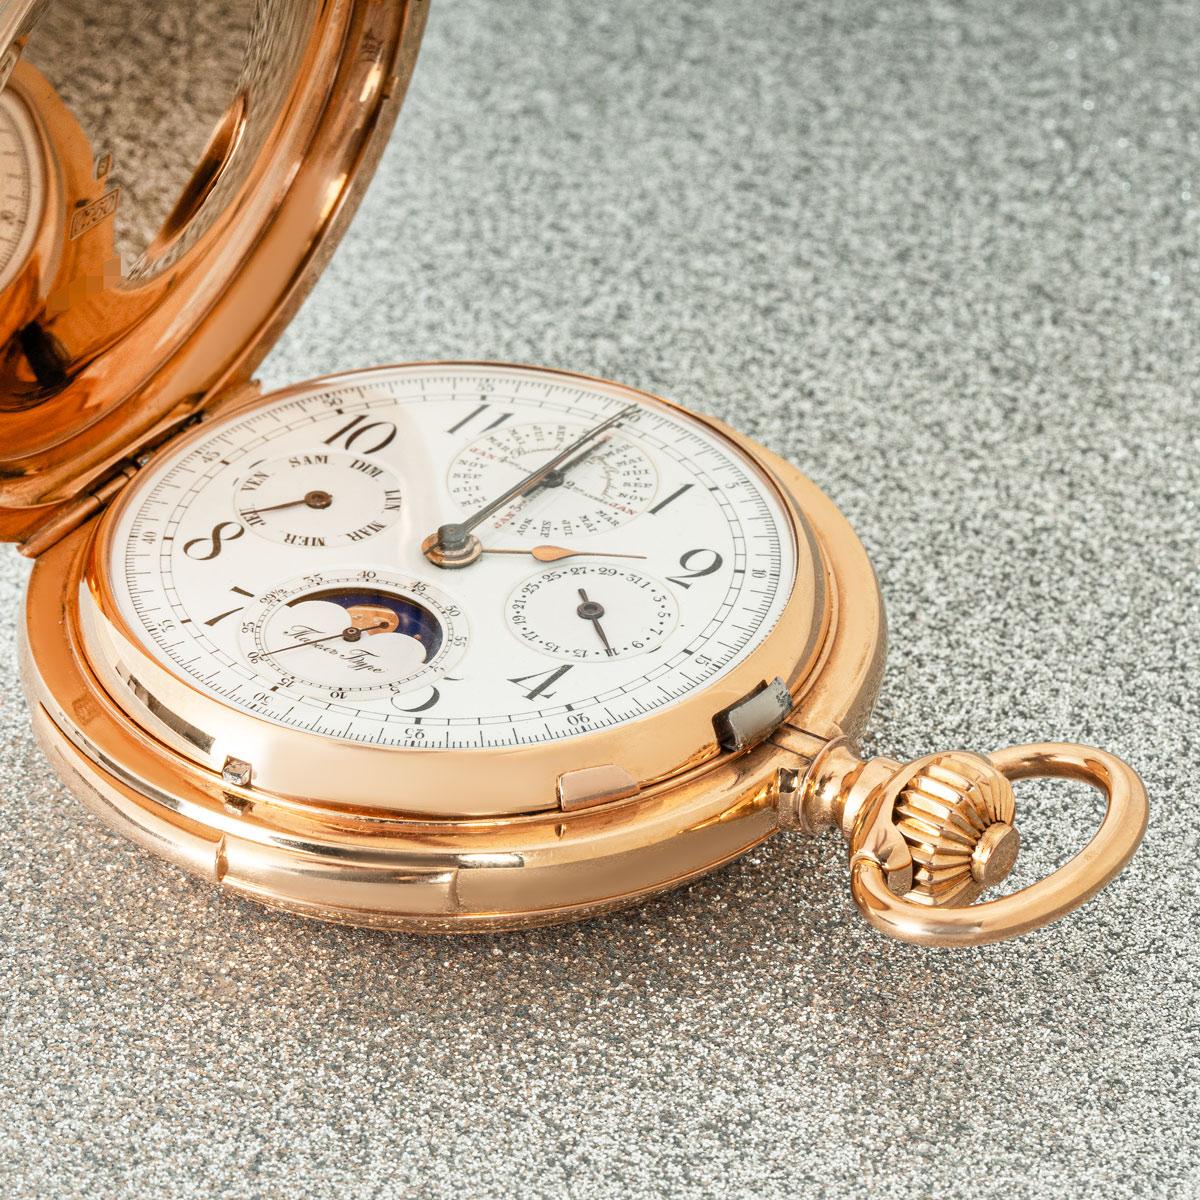 Pavel Buhre. A Massive Gold Keyless Lever Perpetual Calendar Minute Repeater Chrongraph Full Hunter Pocket Watch C1890

Dial: The excellent white enamel dial with Arabic numerals and outer tachometric minute track. The four subsidiary dials with the